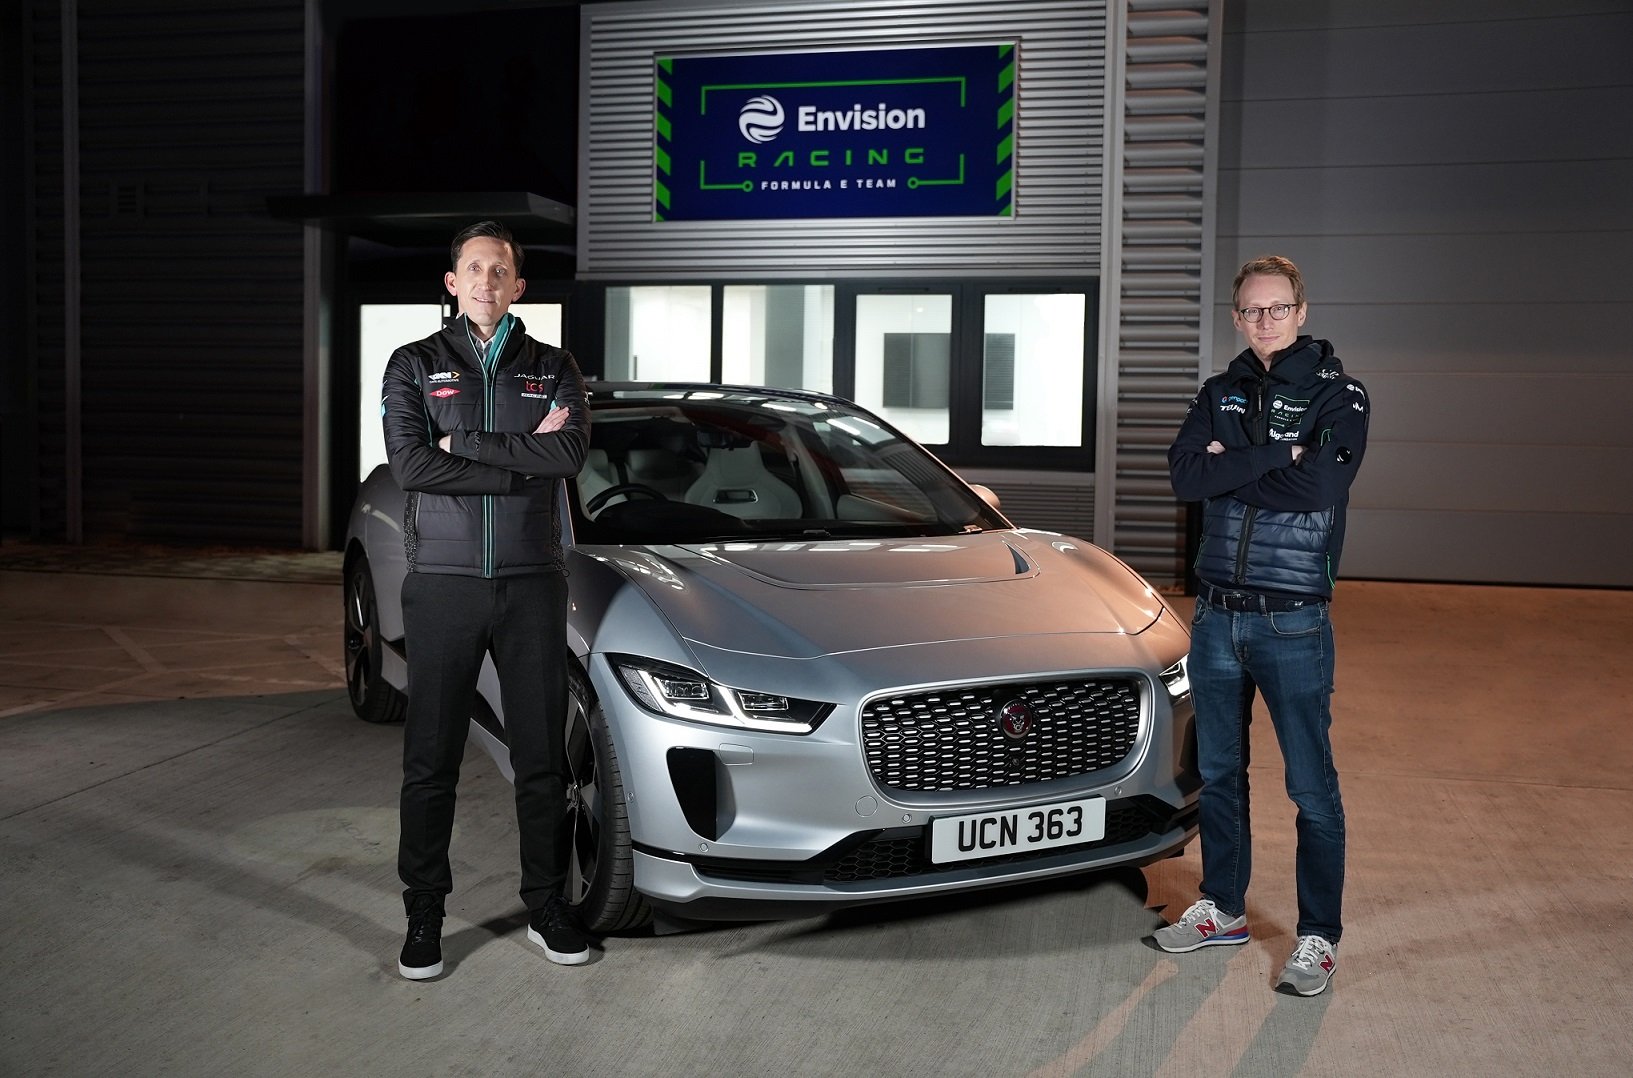 Jaguar and Envision Racing announce a customer supply relationship